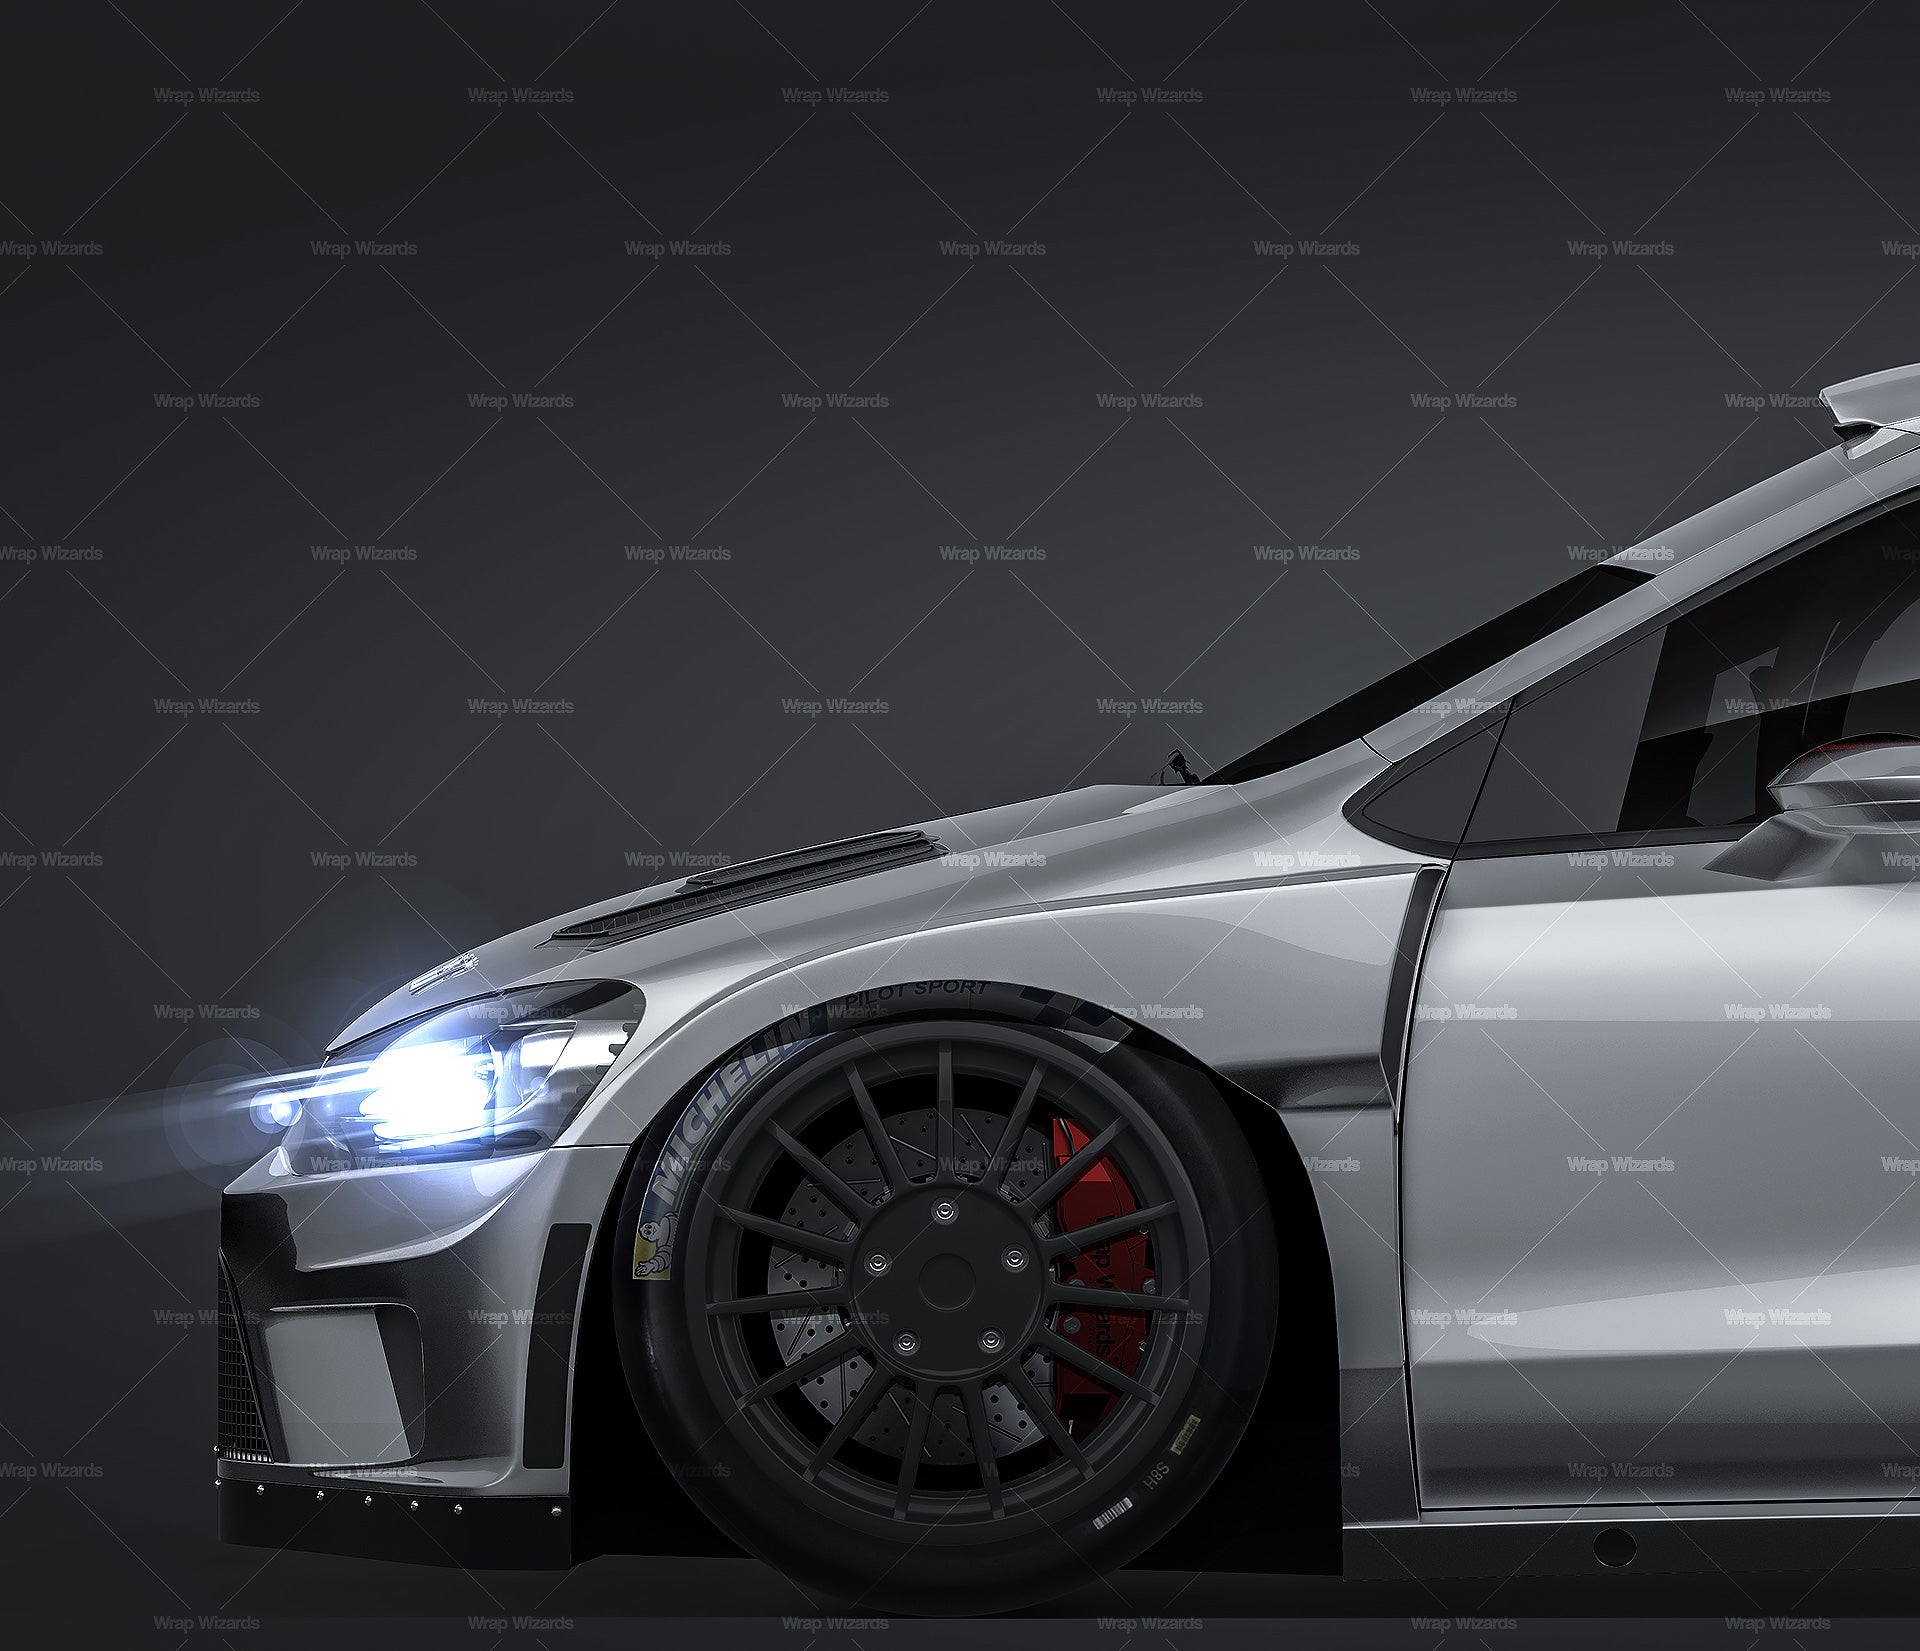 Volkswagen Polo R WRC 2018 glossy finish - all sides Car Mockup Template.psd